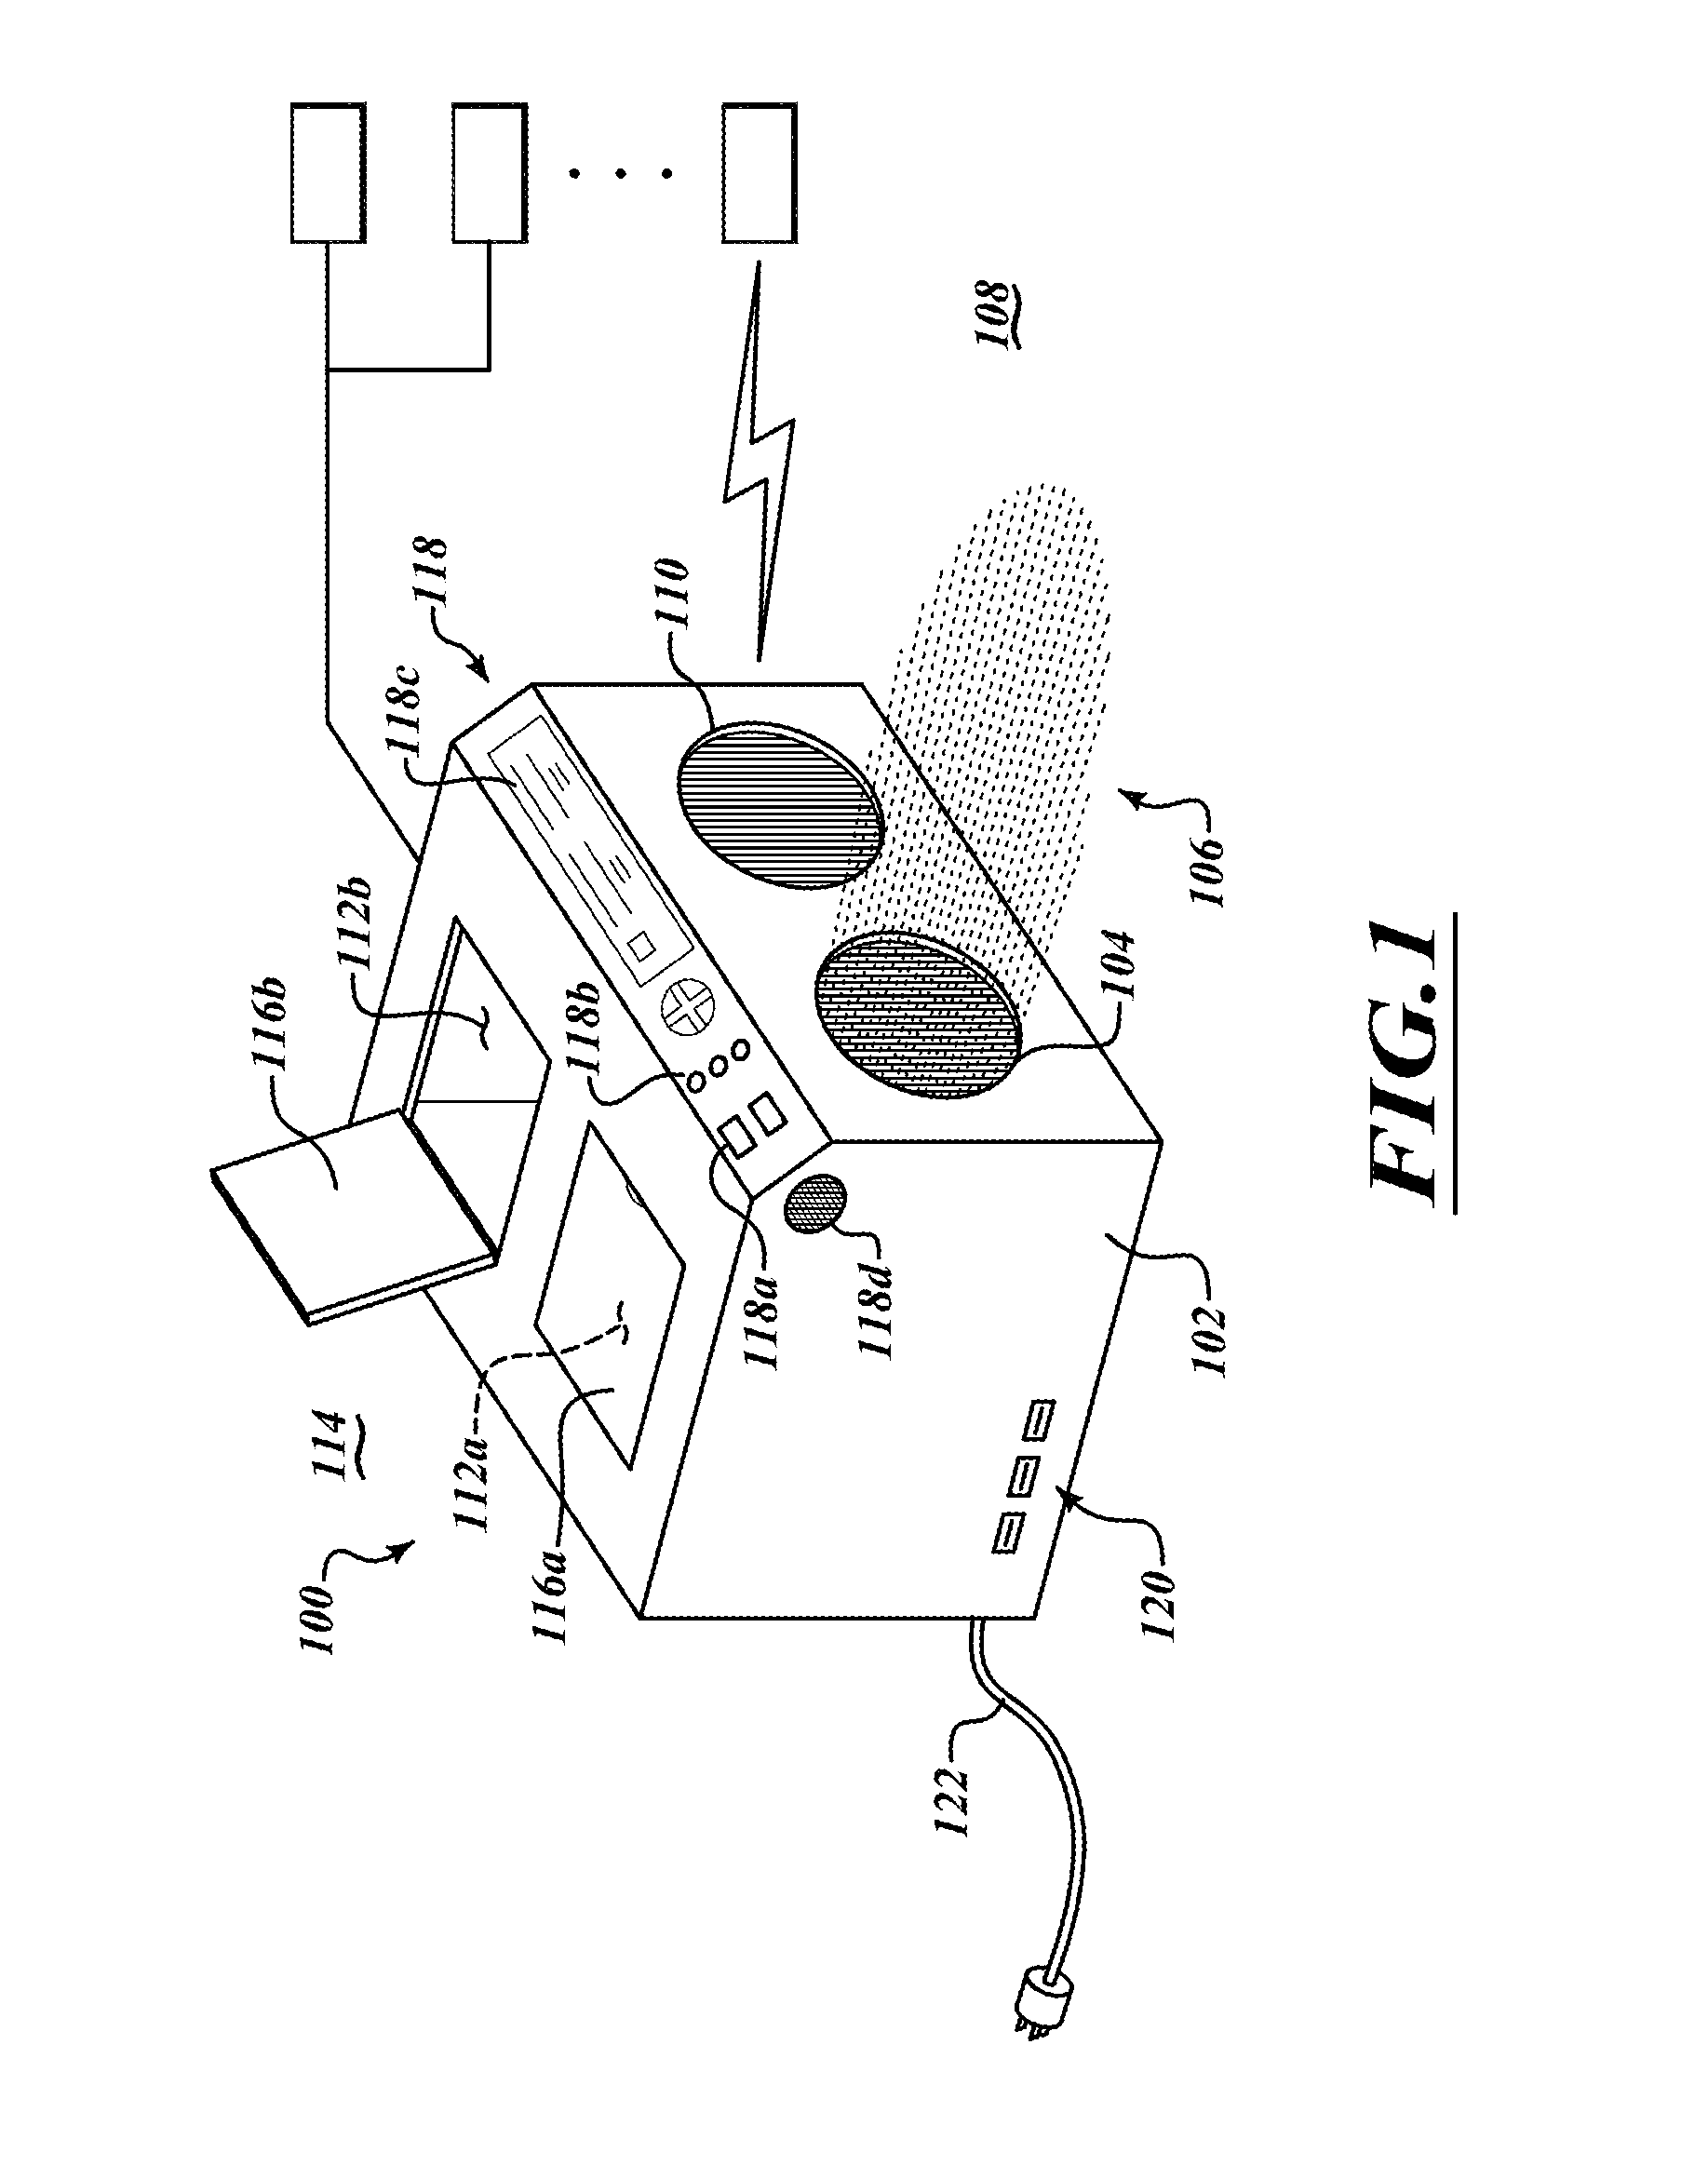 Systems, apparatus, methods and articles for use in sanitization or disinfection